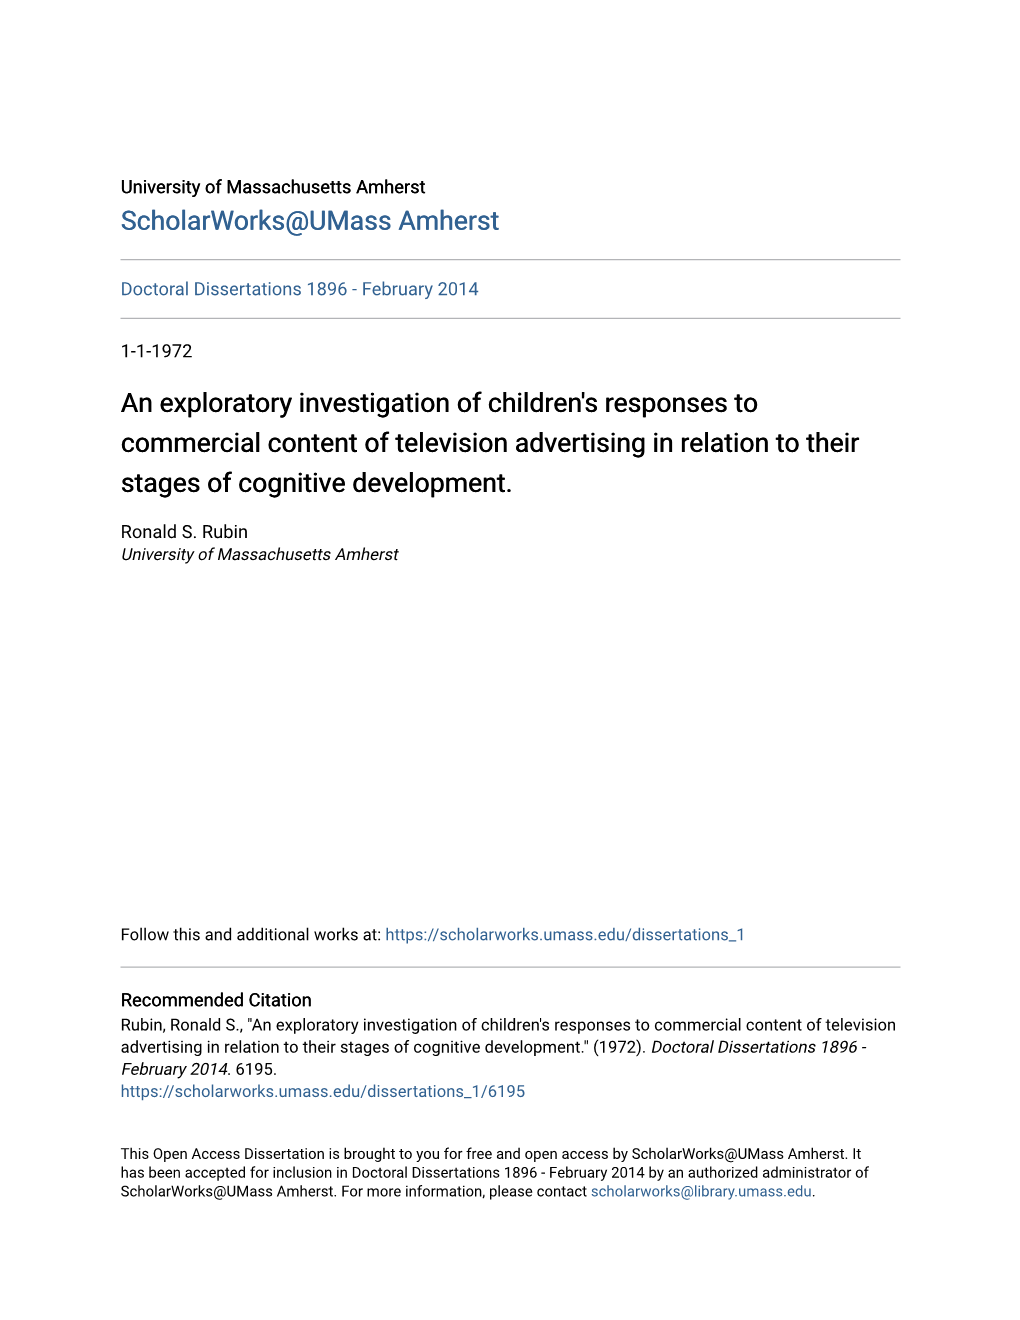 An Exploratory Investigation of Children's Responses to Commercial Content of Television Advertising in Relation to Their Stages of Cognitive Development